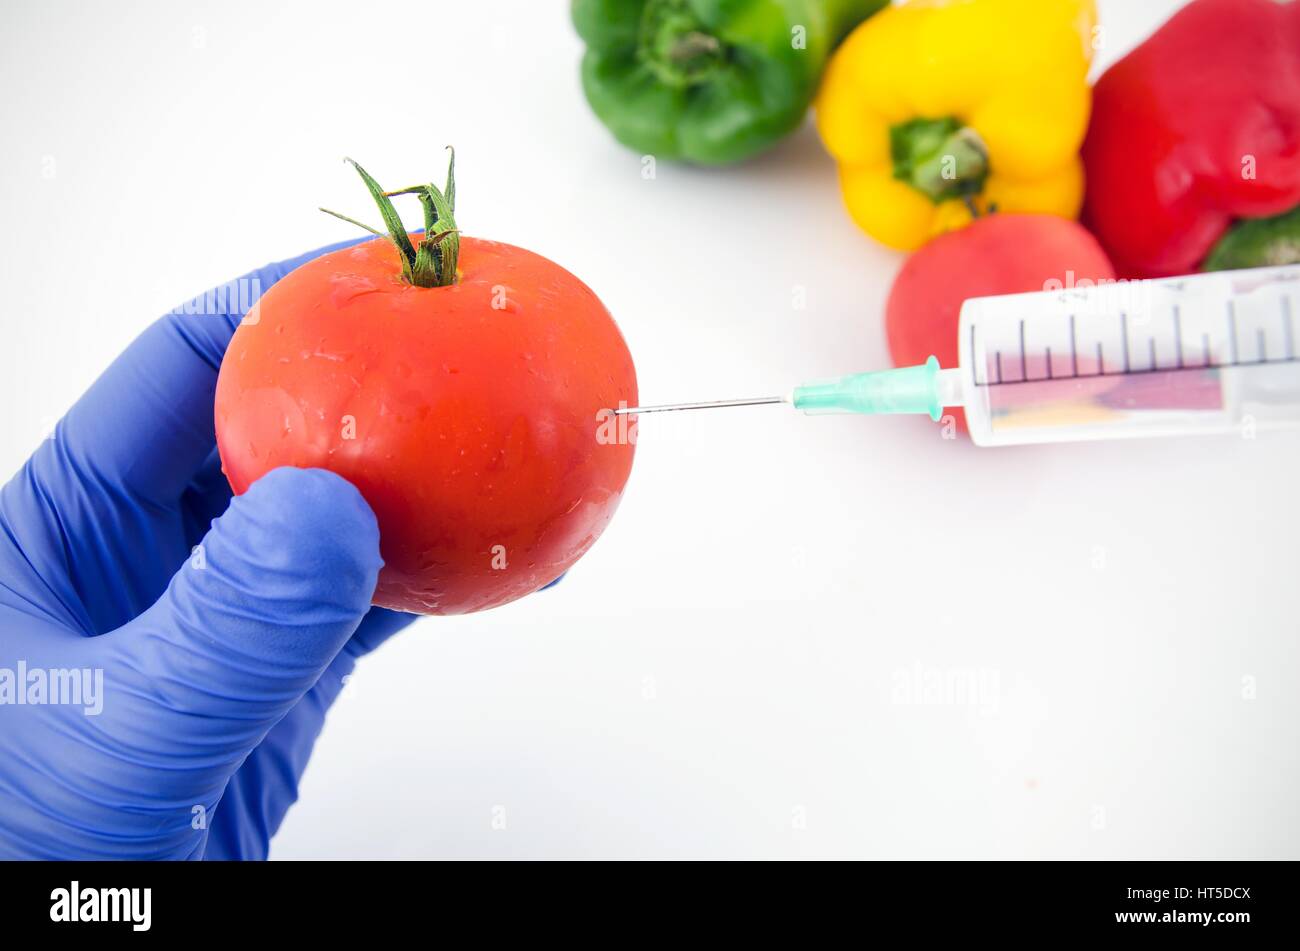 Man with gloves working with tomato in genetic engineering laboratory. GMO food concept. Stock Photo